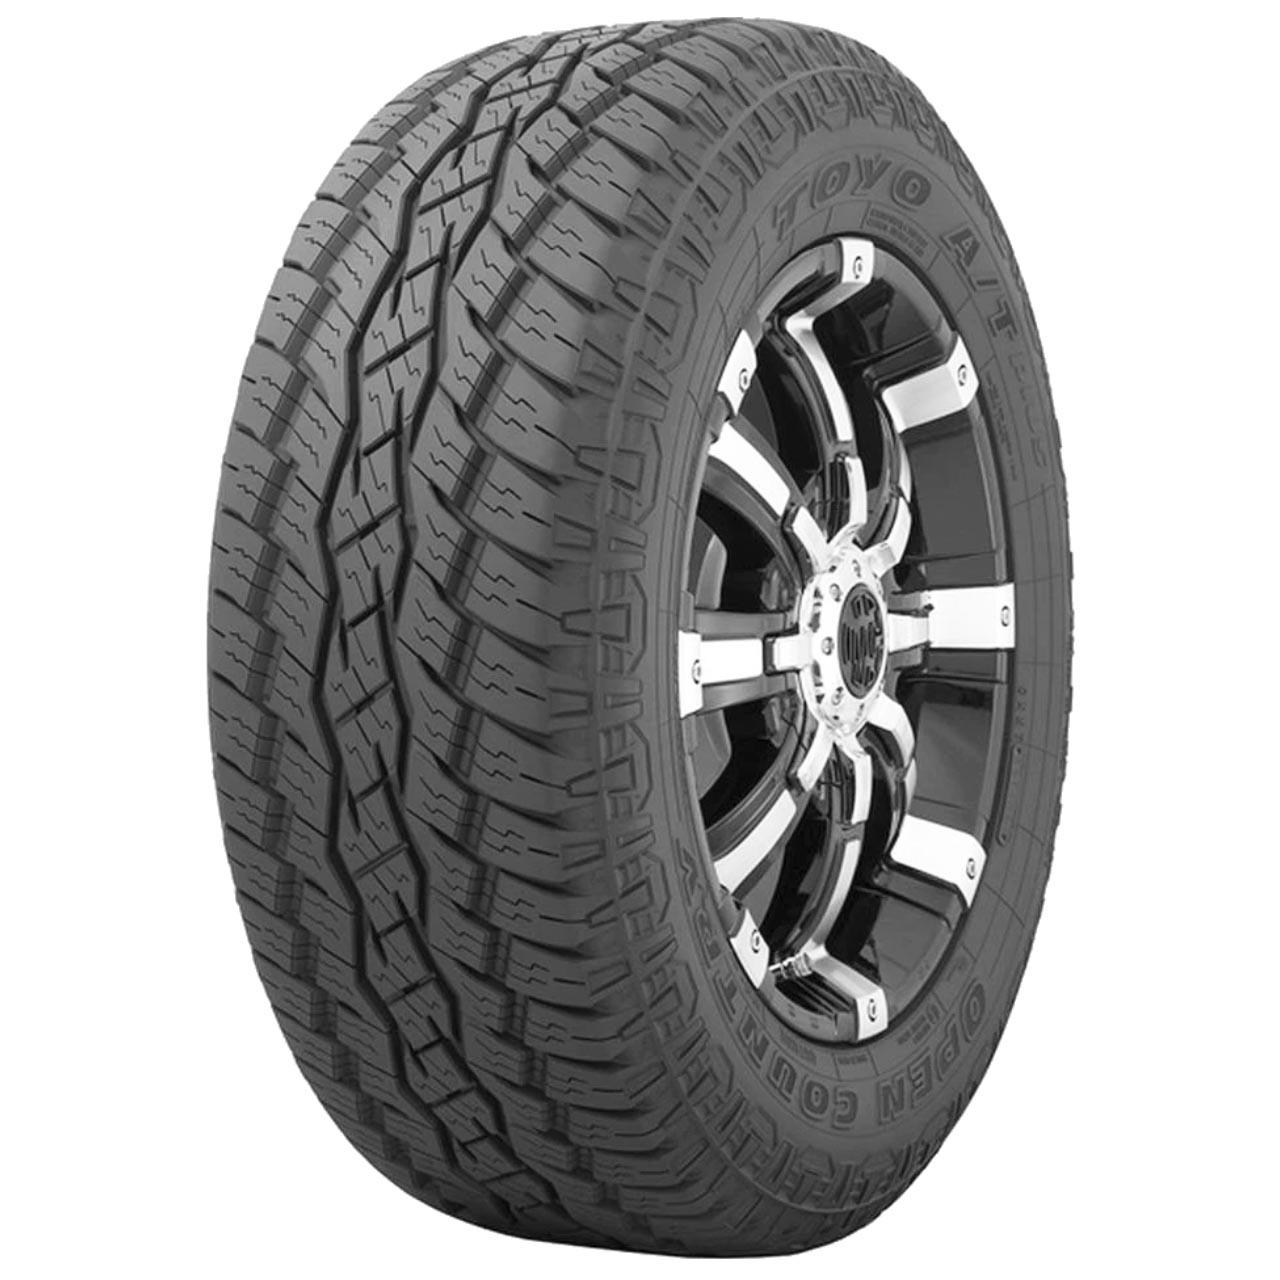 Toyo Open Country AT Plus 255/70R18 113T